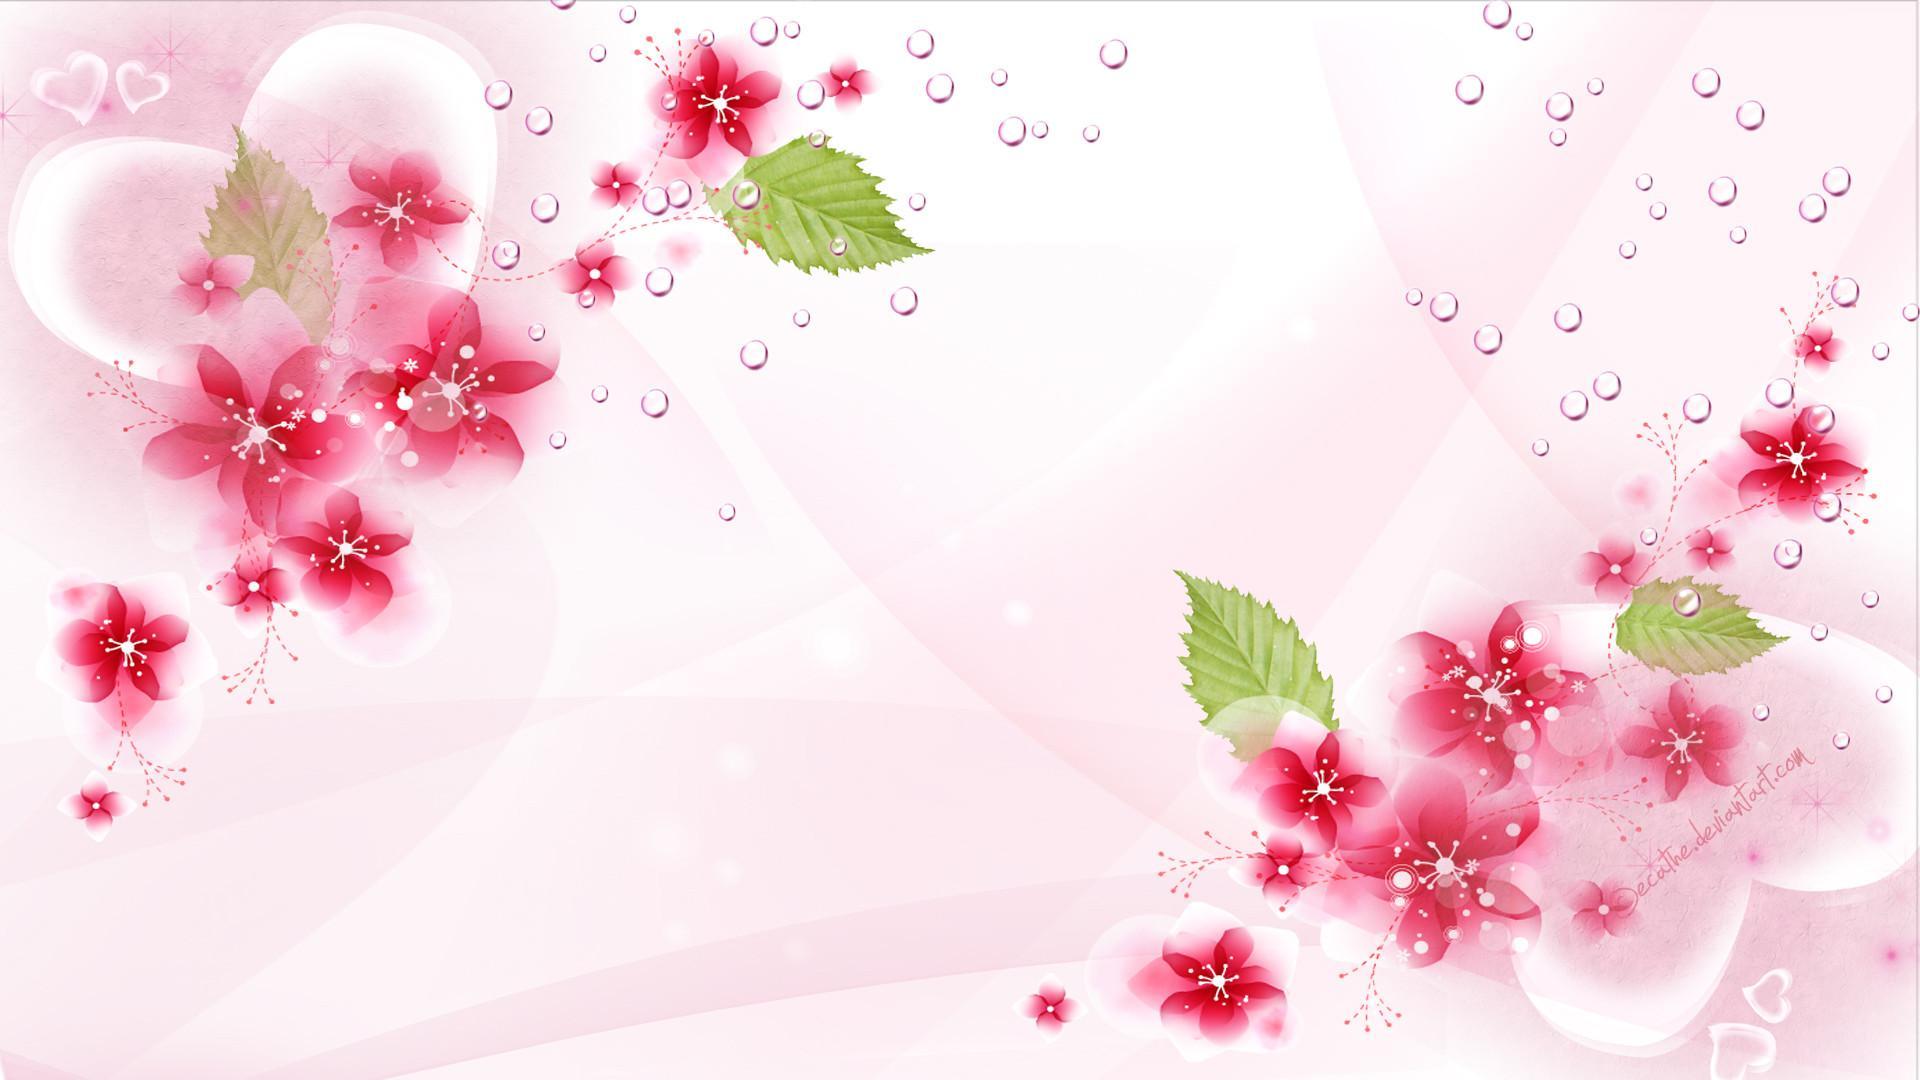 Backgrounds Wallpapers Flowers - Wallpaper Cave